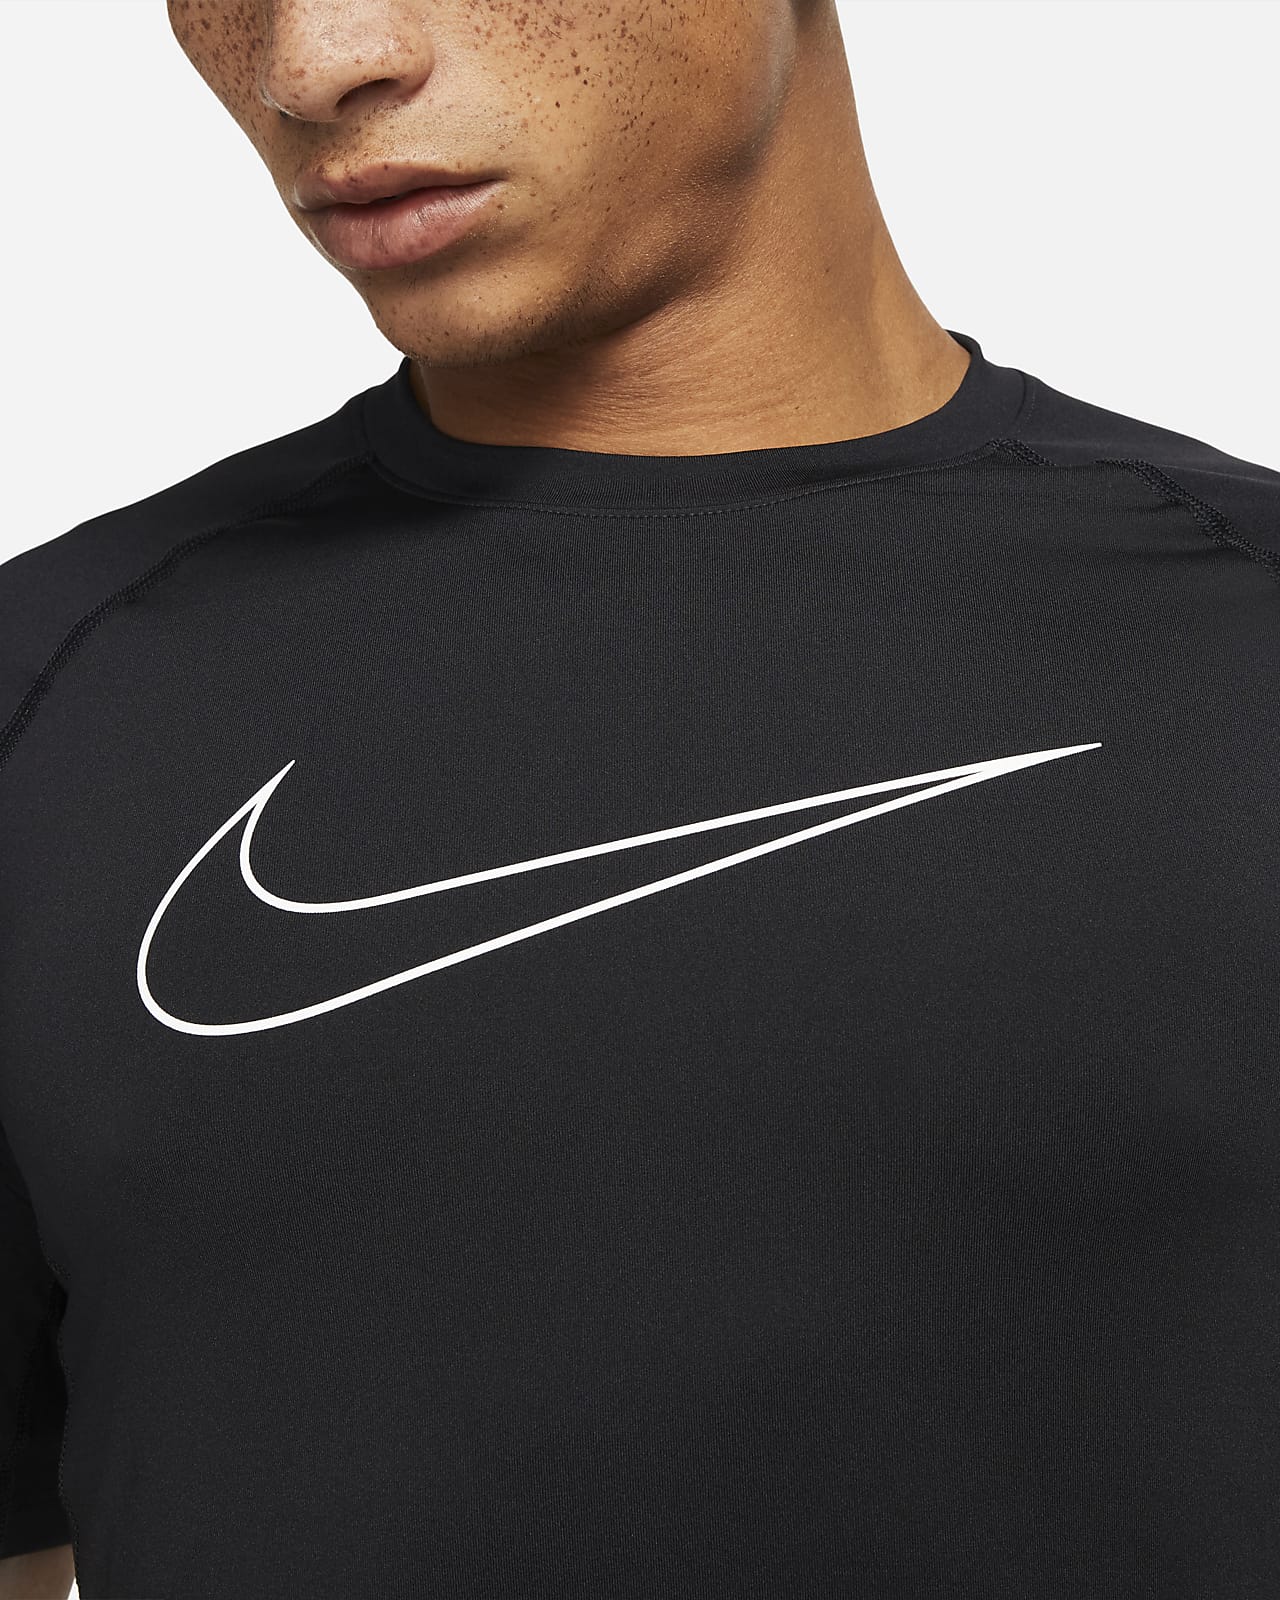 Nike Pro Dri-FIT Men's Short-Sleeve Fitted Top - White